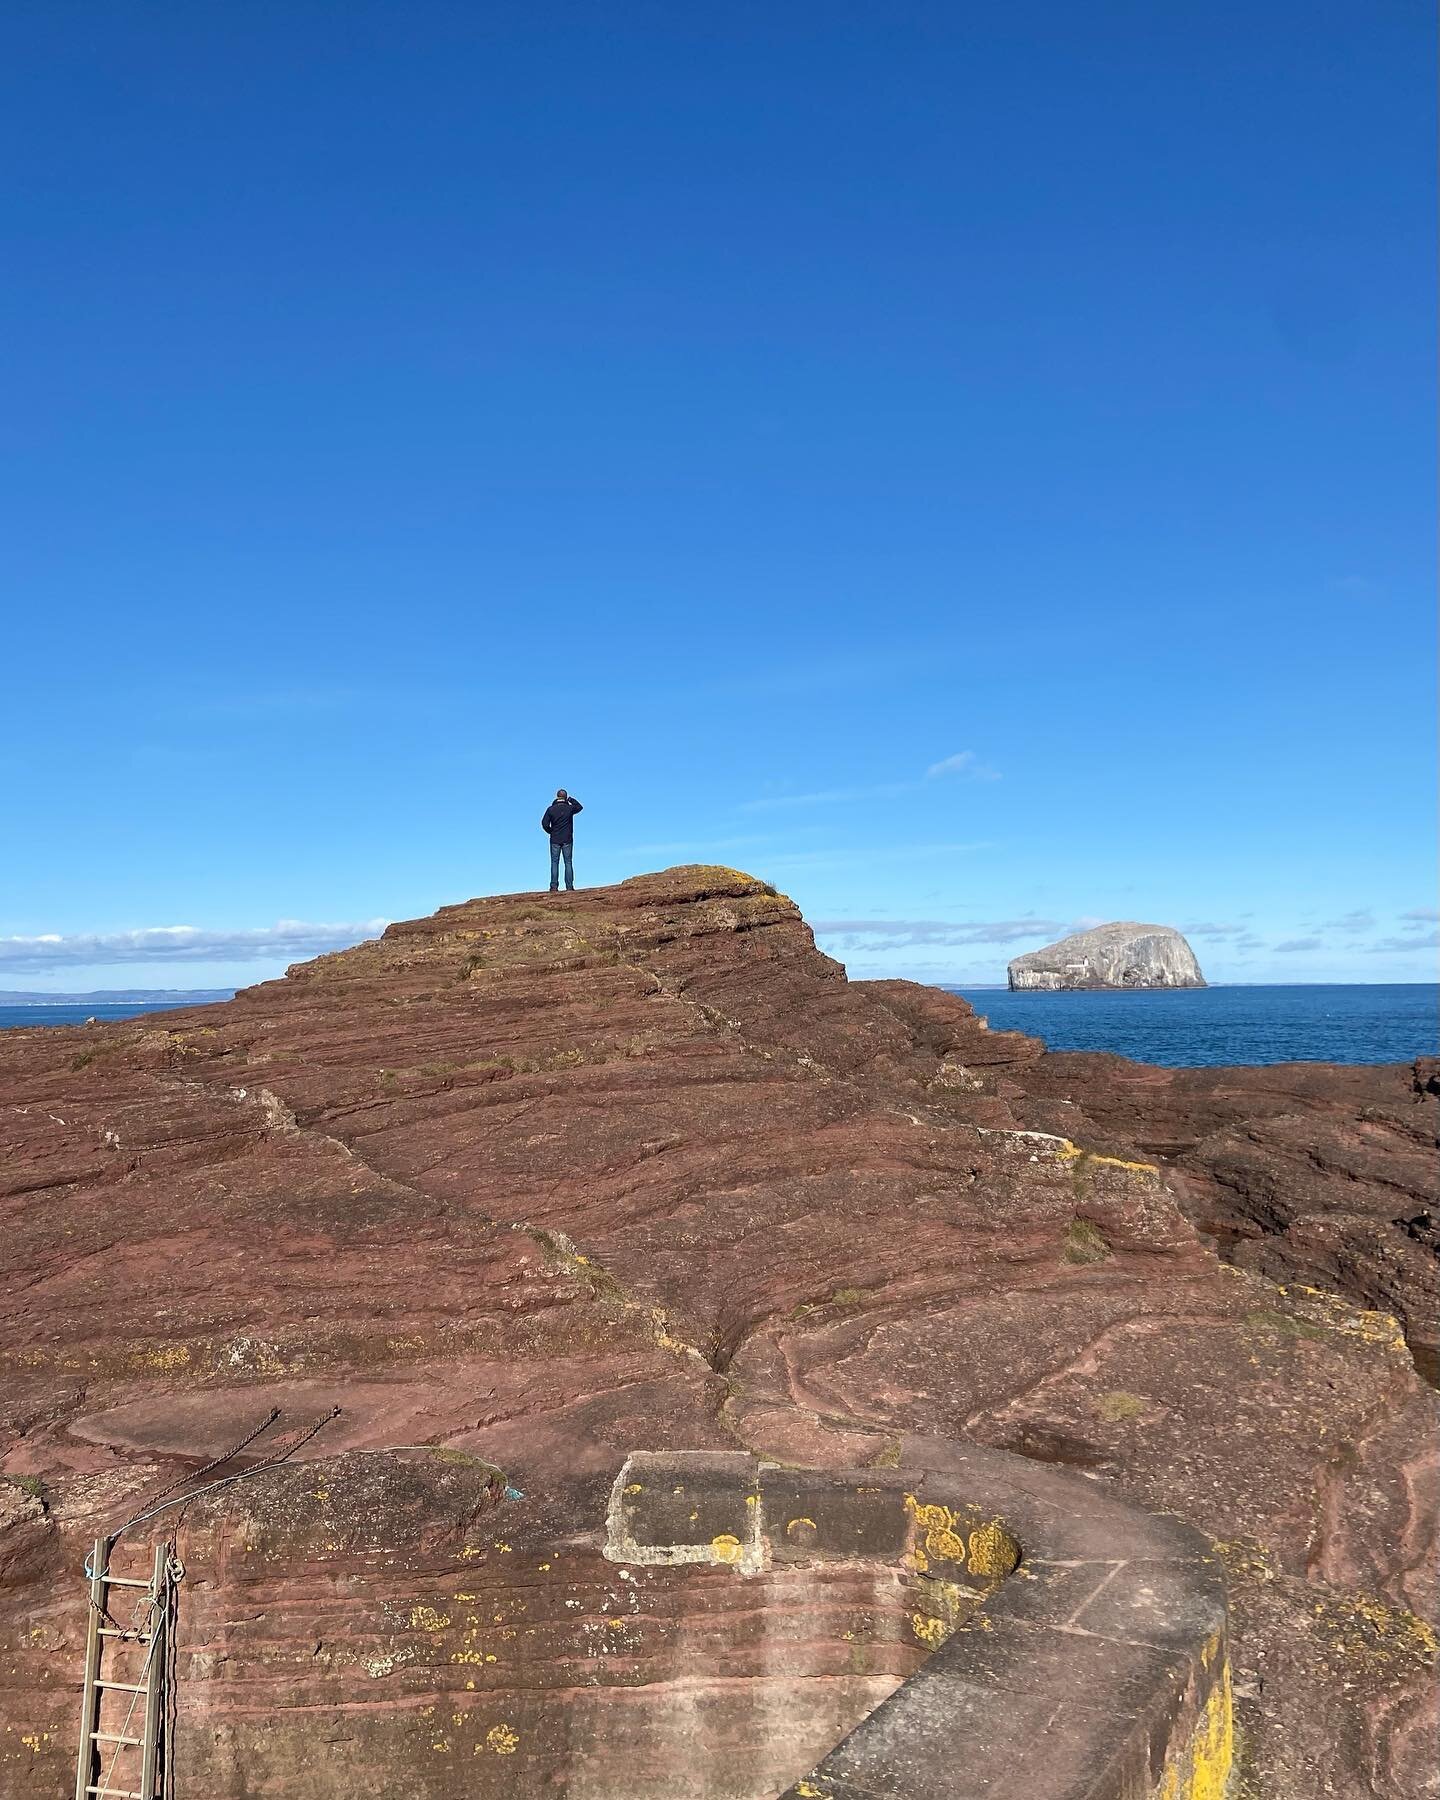 Watching out for summer, not far away now I think?
Seacliff Harbour still amazes me every time we go there. Hard to believe that this is my husband&rsquo;s office, with that view of Tantallon Castle and the Bass Rock. Feels like working in an industr